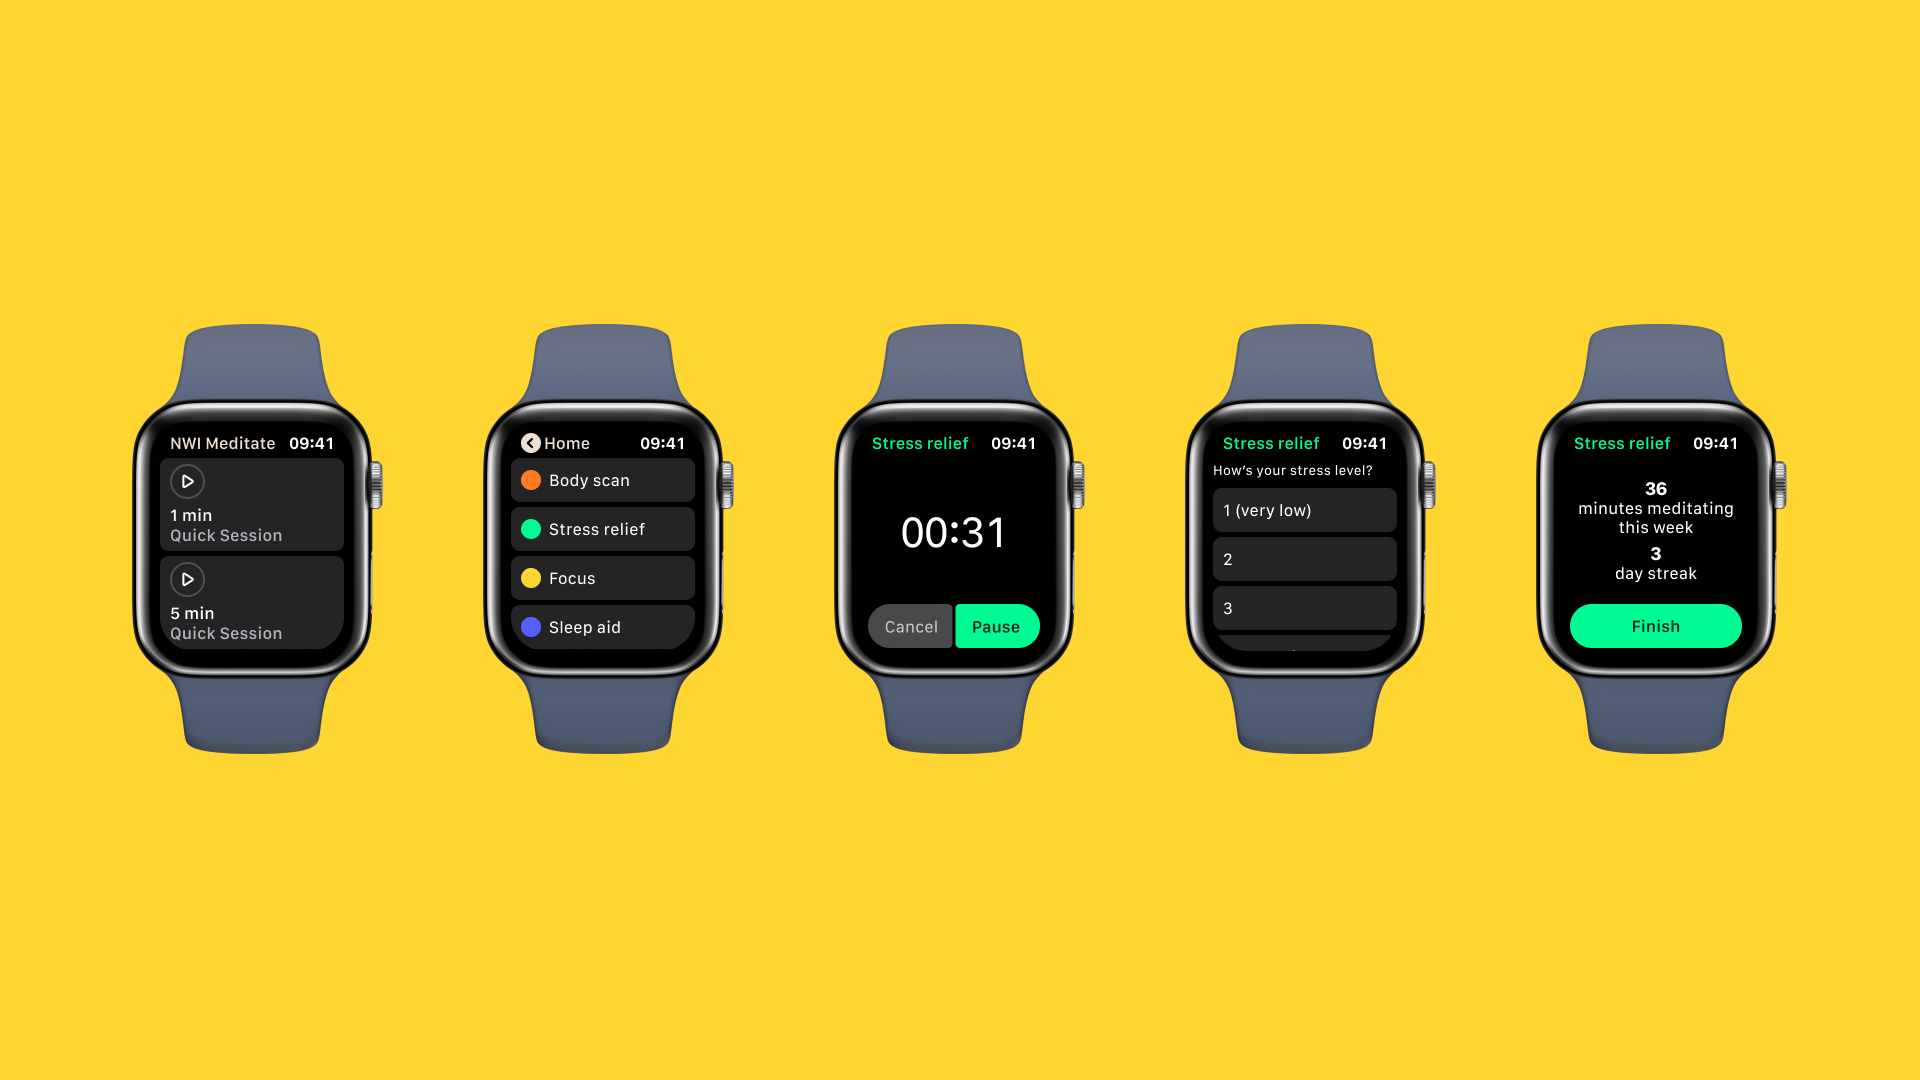 An overview of the Apple Watch app screens, displaying the Quick Session user flow. 1) Options for a 1- or 5-minute quick session. 2) Options for type of meditation: Body scan, Stress relief, Focus, or Sleep aid. 3) The duration of an active session with buttons for Cancel and Pause. 4) 'How's your stress level?' with buttons for a scale, with 1 being 'very low'. 5) Number of minutes meditated this week, length of streak (days in a row) and a large Finish button.